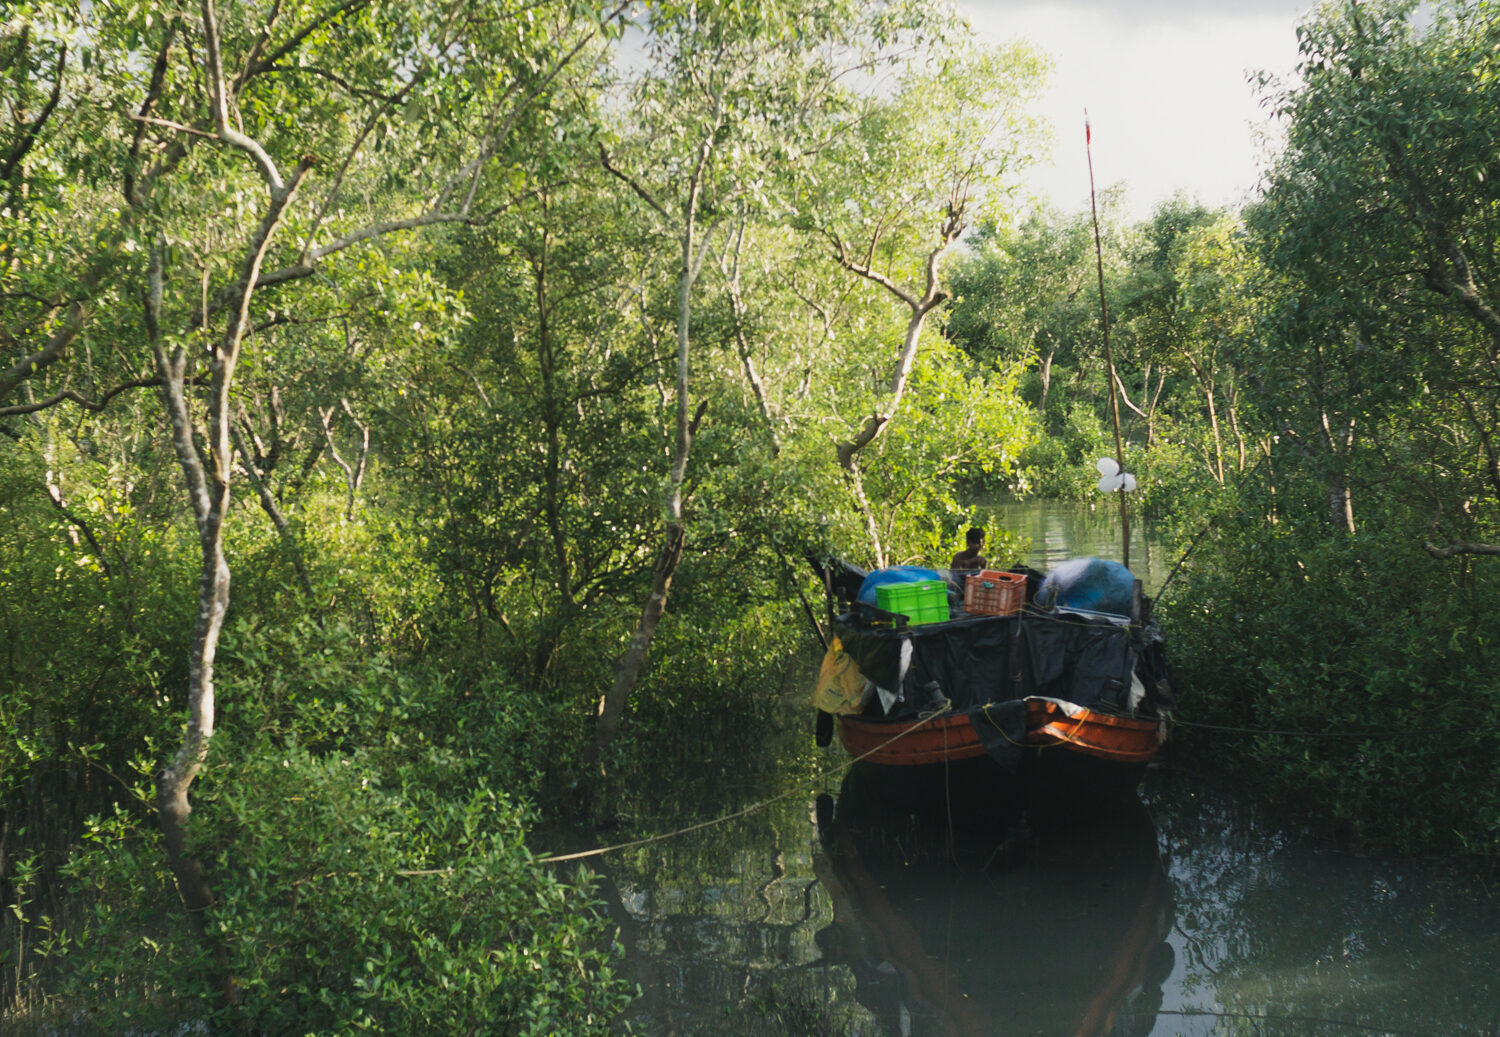 A fisher navigates his boat in the mangrove forest,
                                                                                                 prepared for a trip with all the essentials.